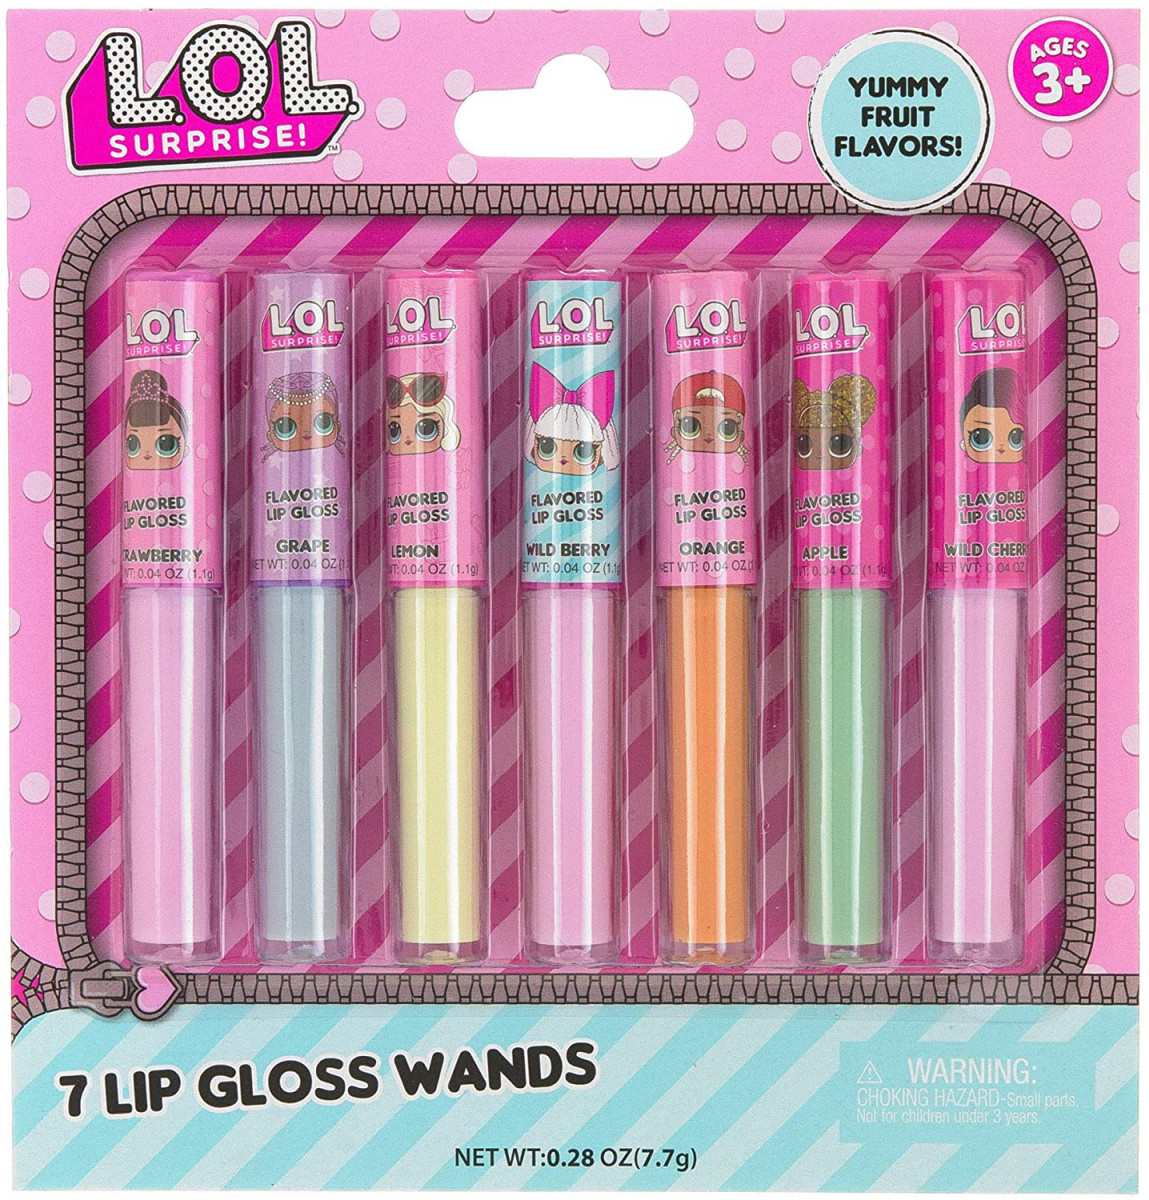 Alea's Deals L.O.L Surprise 7-Pack Lip Gloss for Girls, Lol Lip Gloss Up to 34% Off! Was $5.99!  